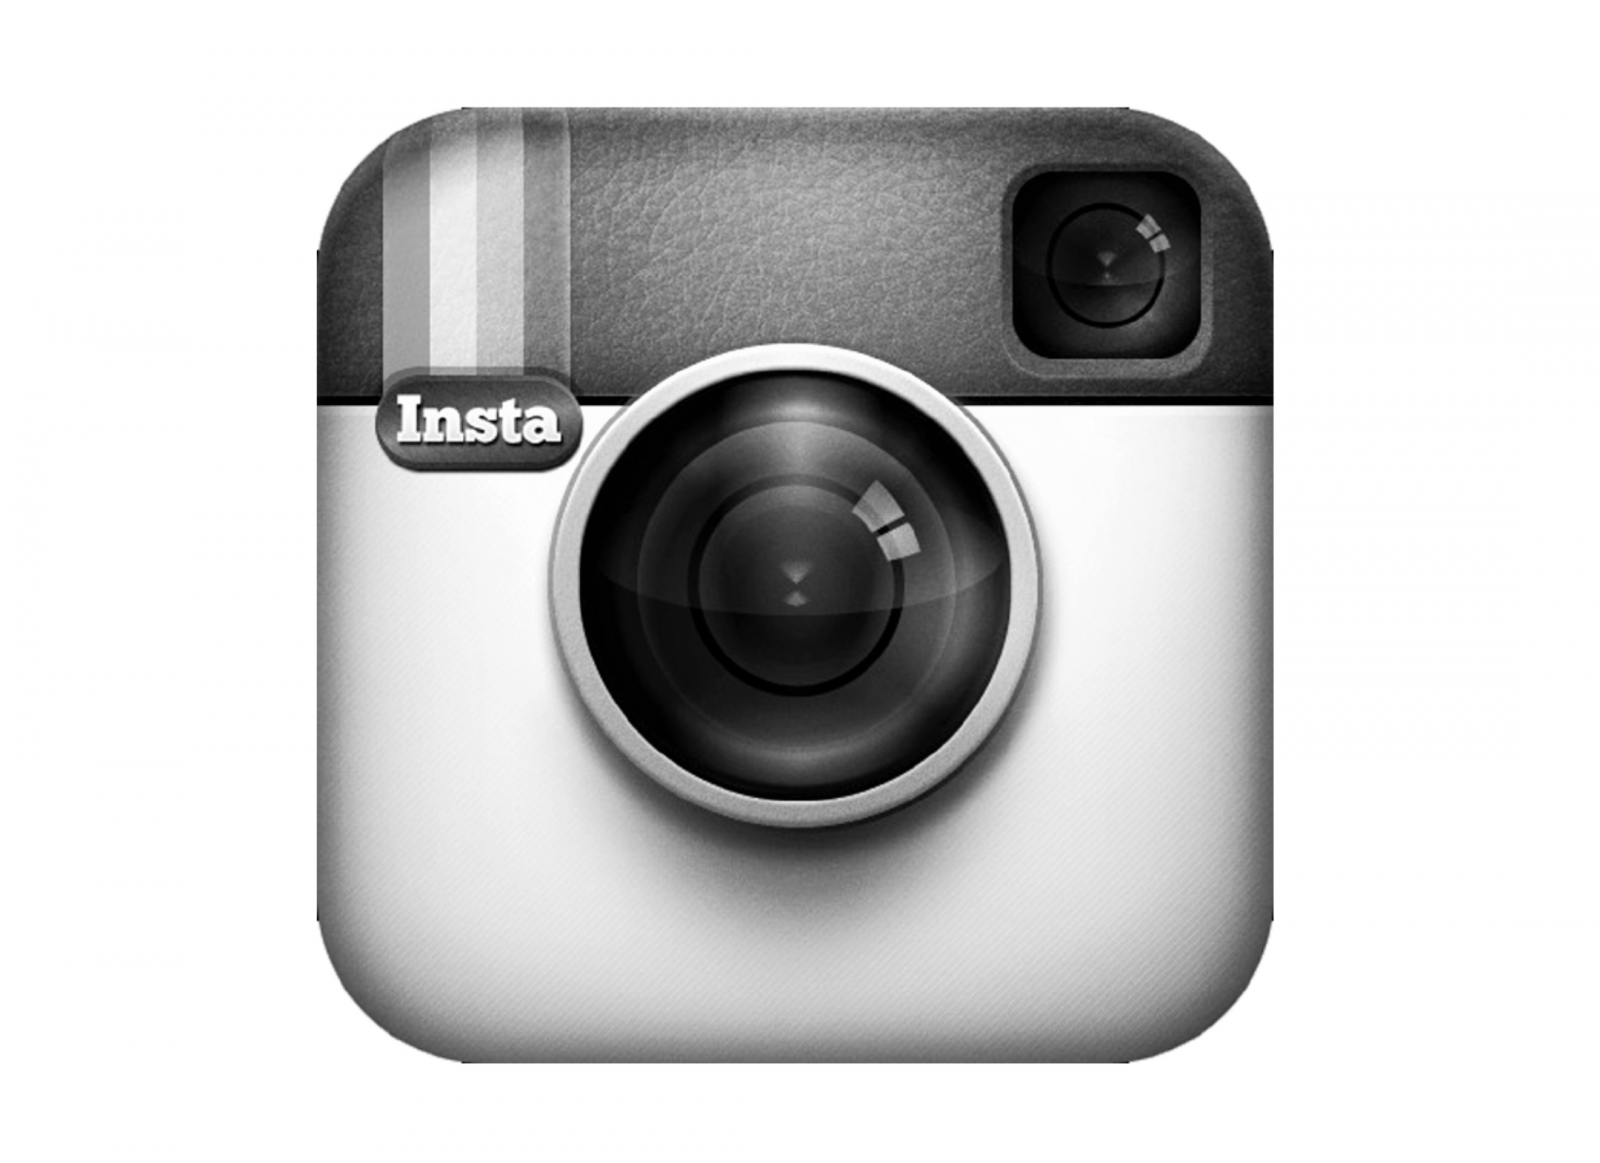 instagram-could-boot-app-colors-to-make-your-photos-look-better-image-cultofandroidcomwp-contentuploads201604Instagram-logo-005-png